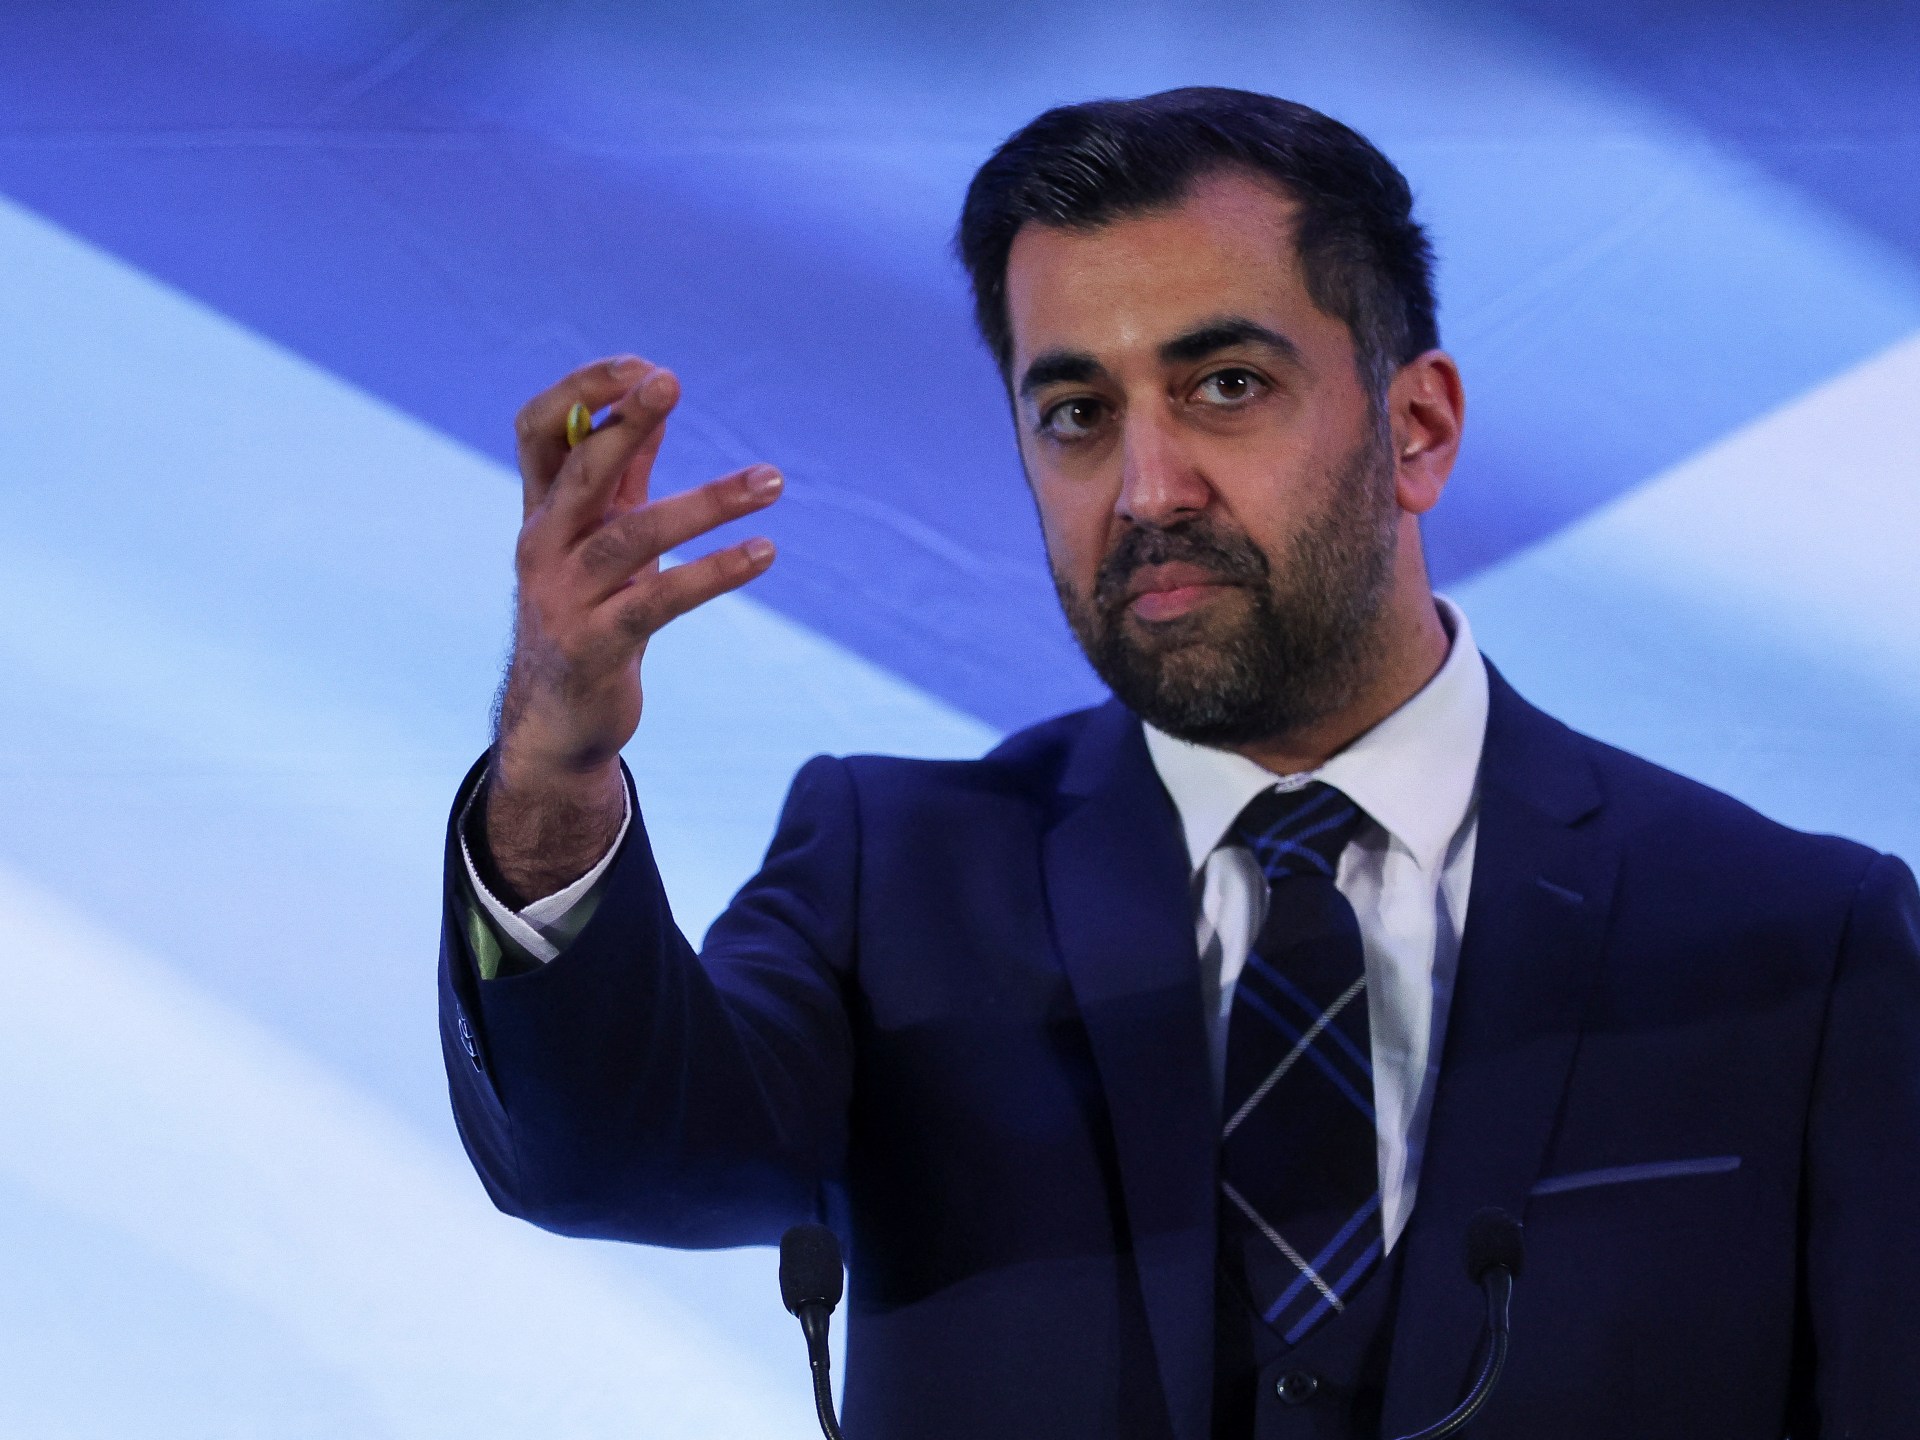 Humza Yousaf resigns as Scotland’s first minister